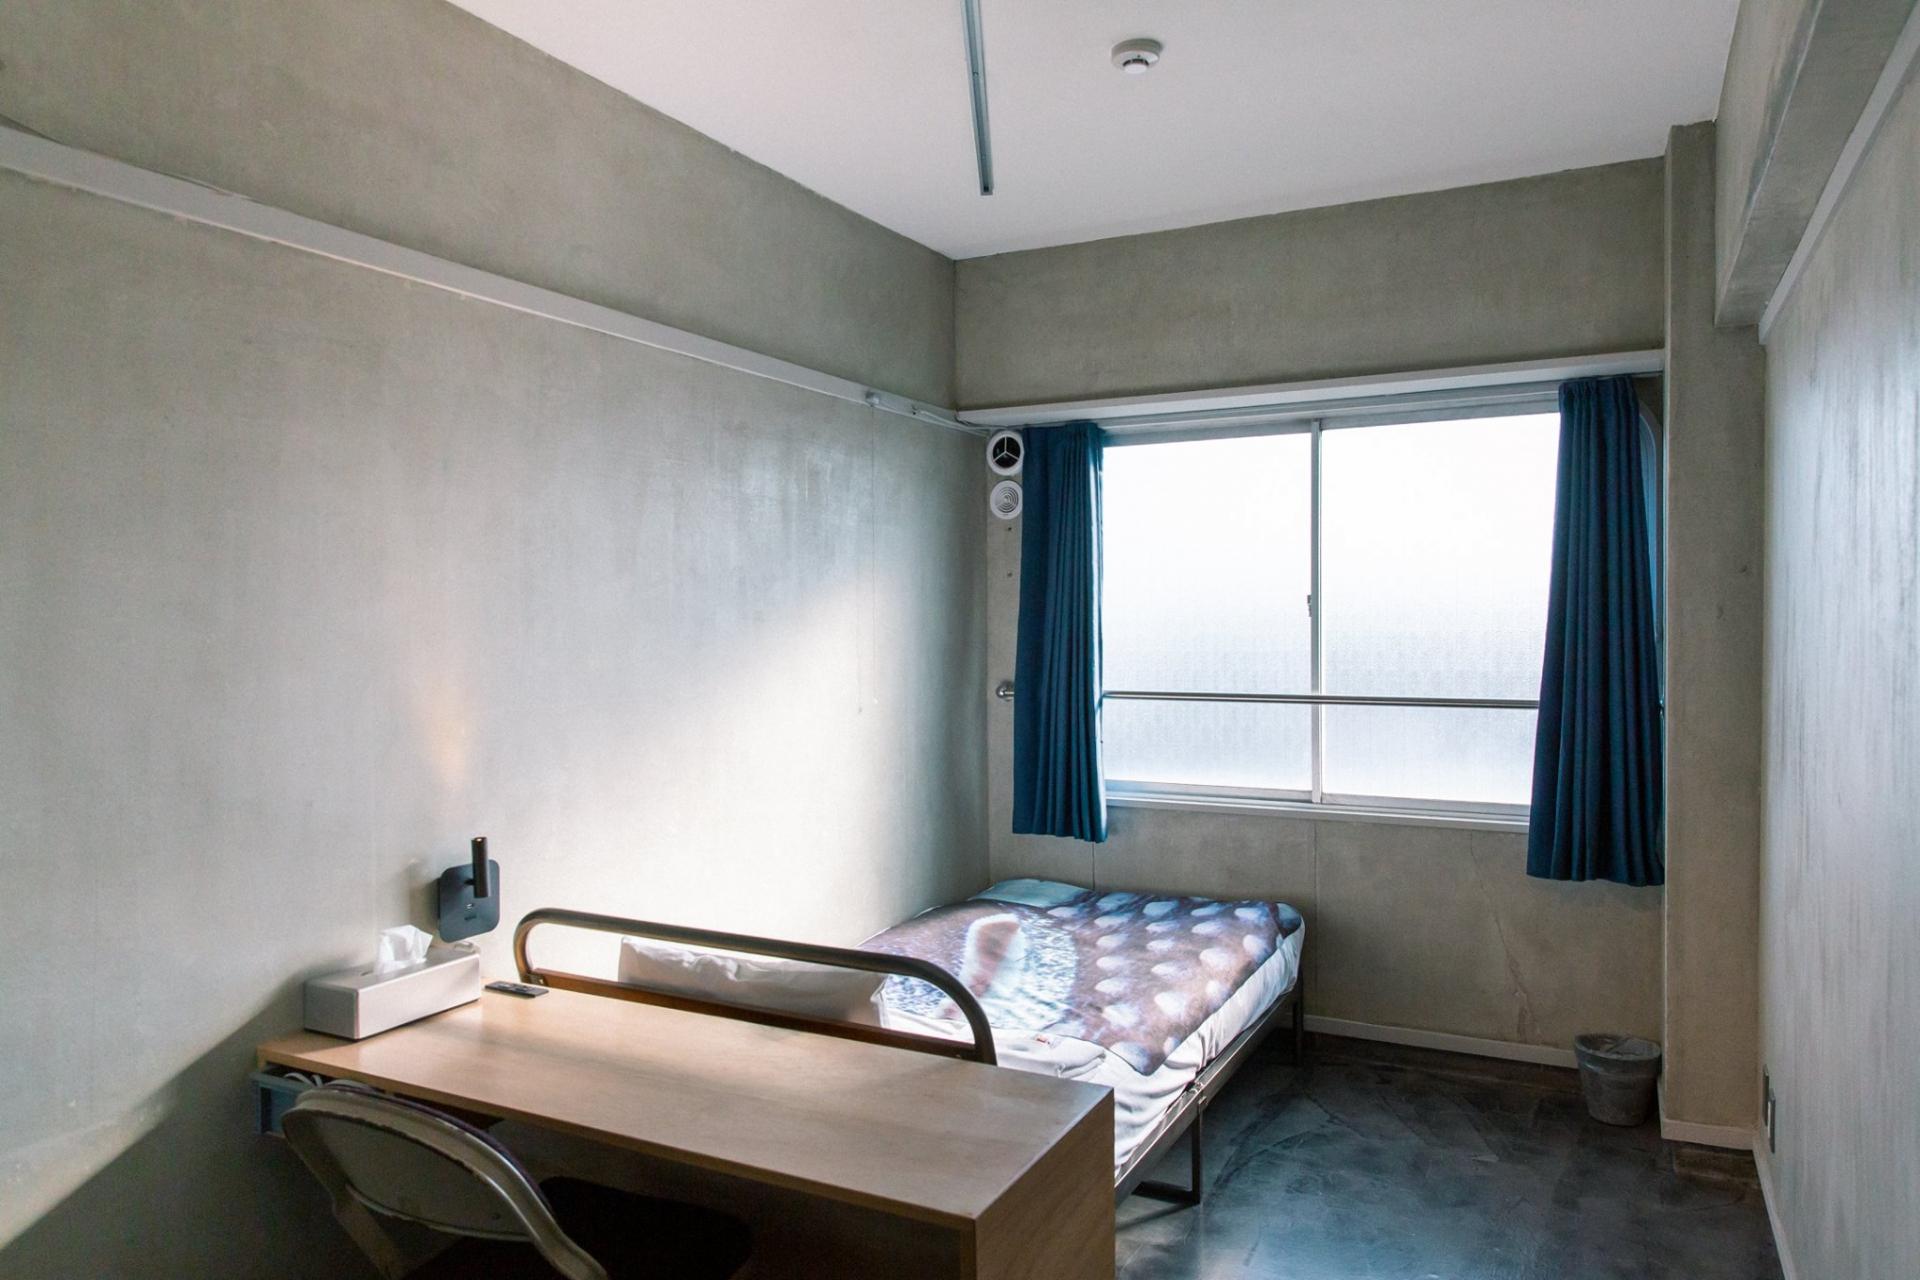 Kyoto Hotel Blurs the Lines between Co-working, Co-living and Traditional Hospitality